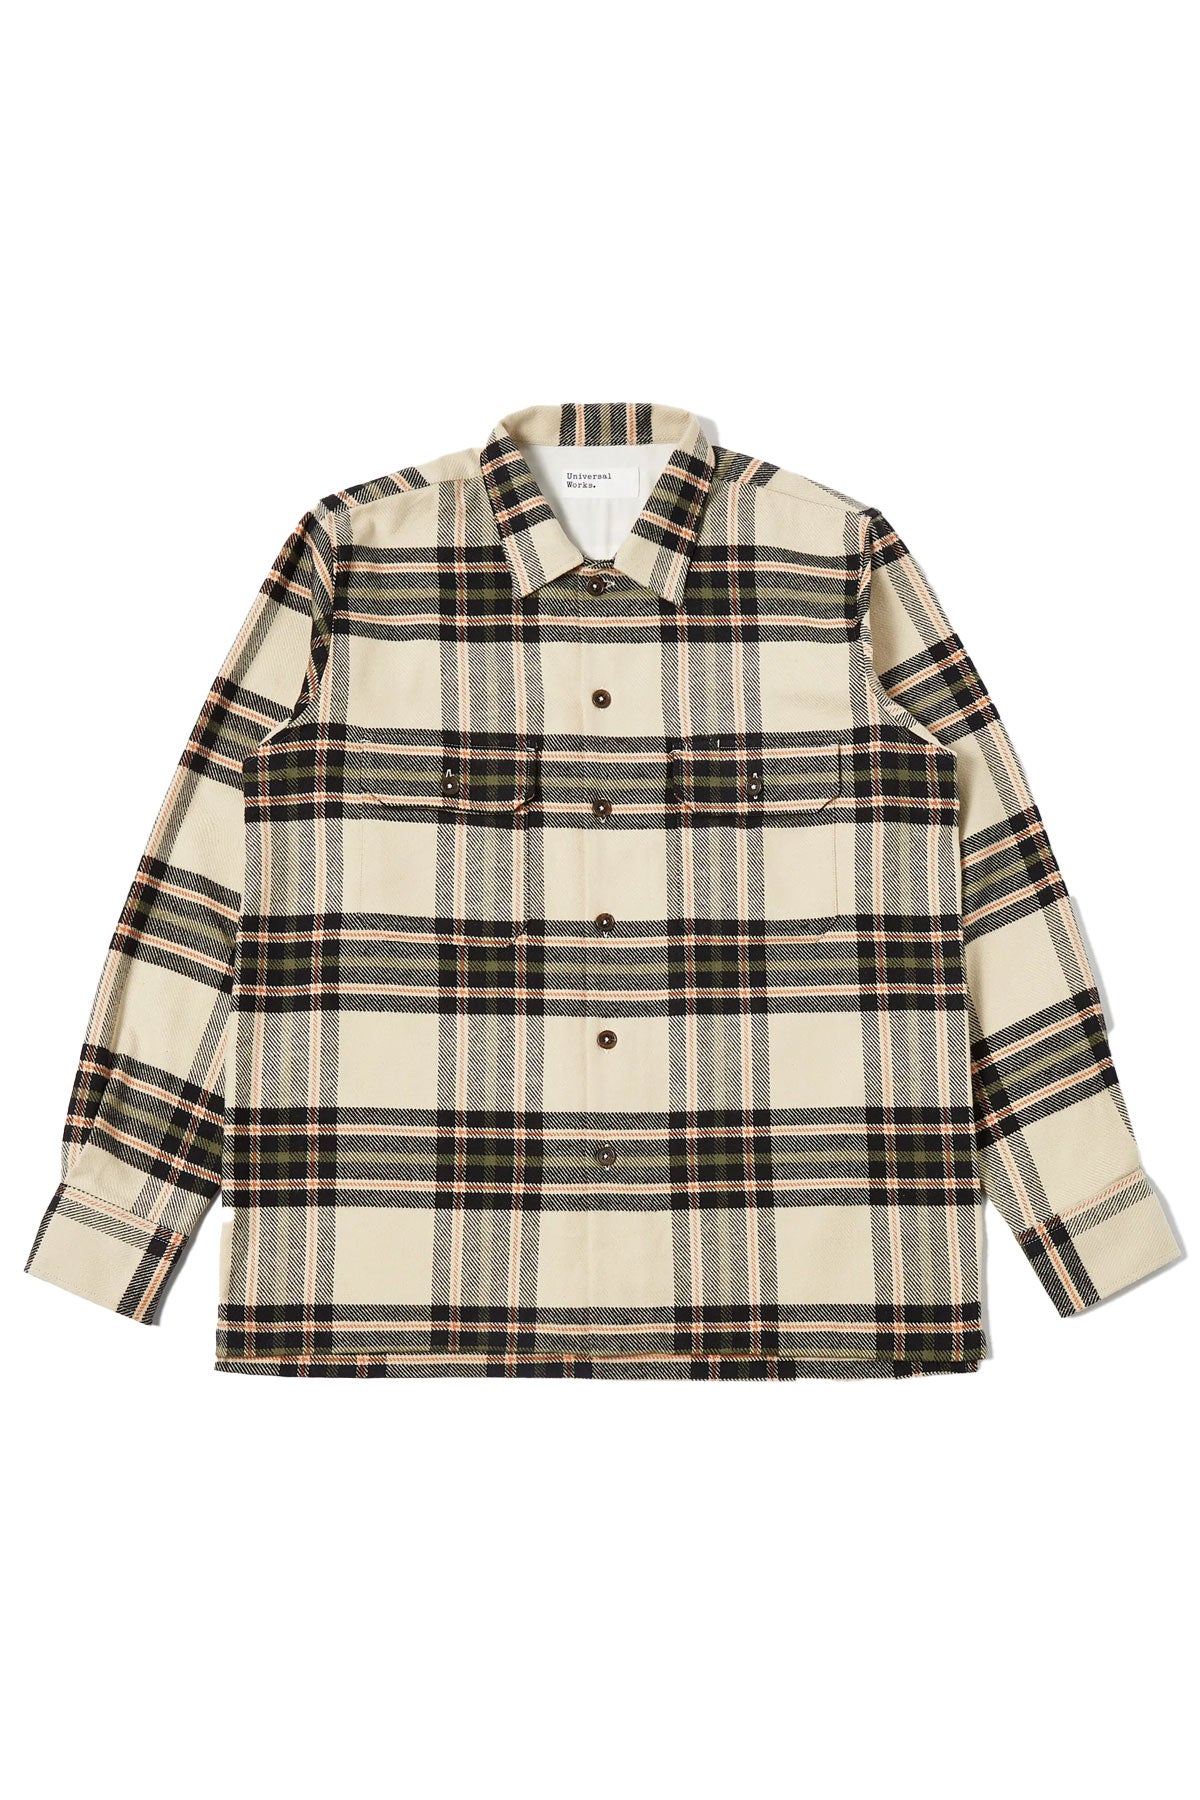 Universal Works -  Utility Shirt In Charcoal Organic Cozy Check